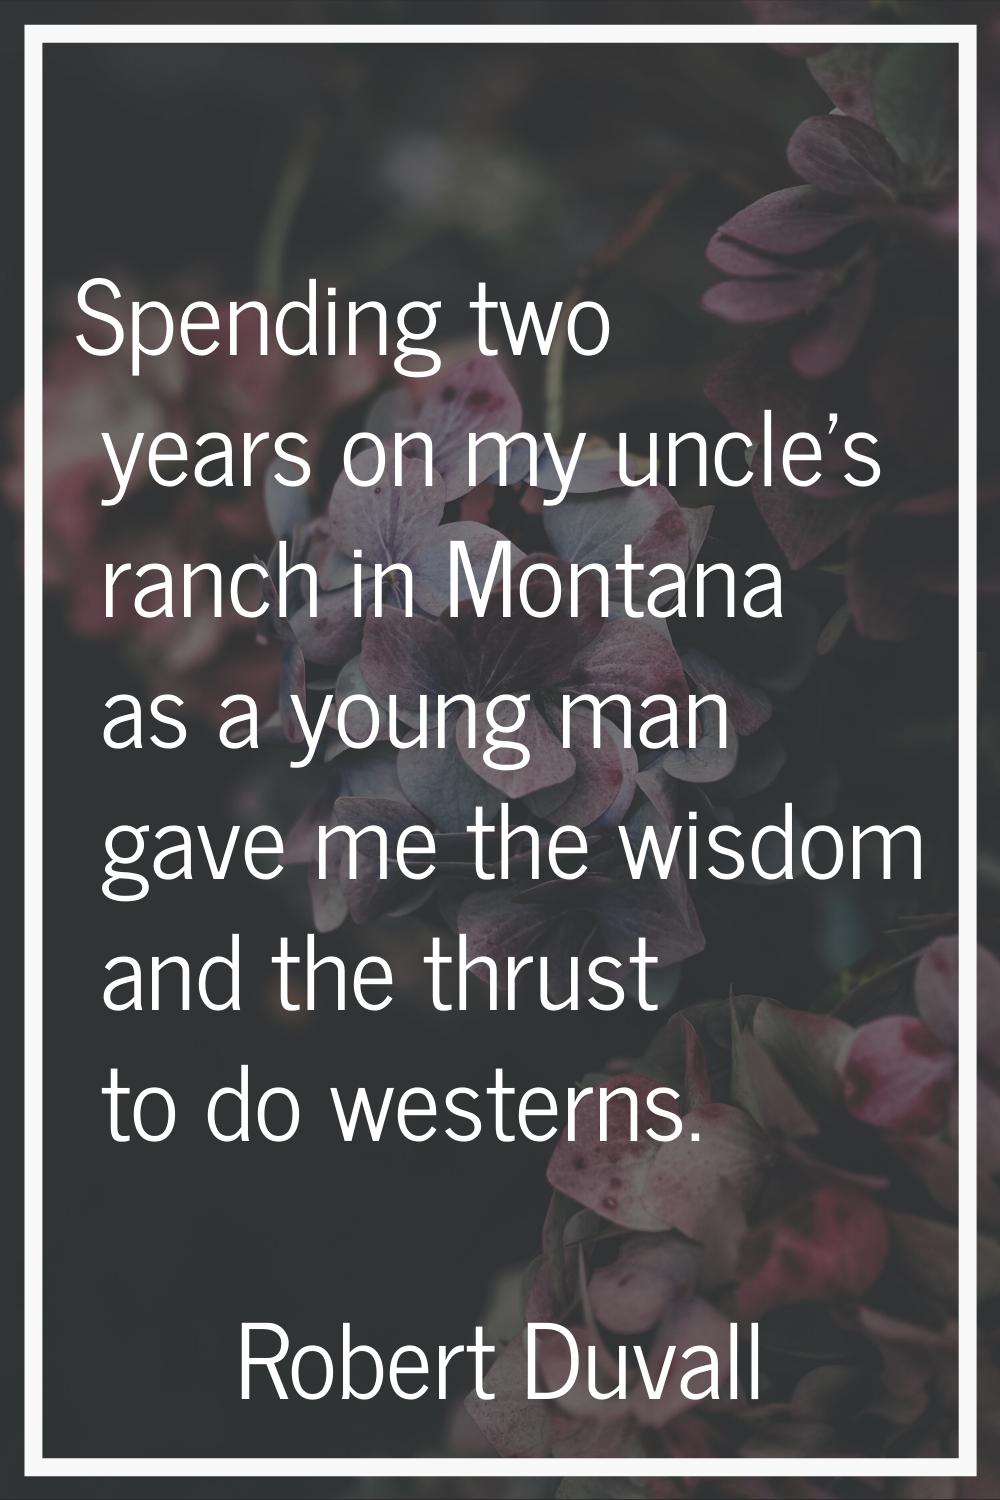 Spending two years on my uncle's ranch in Montana as a young man gave me the wisdom and the thrust 